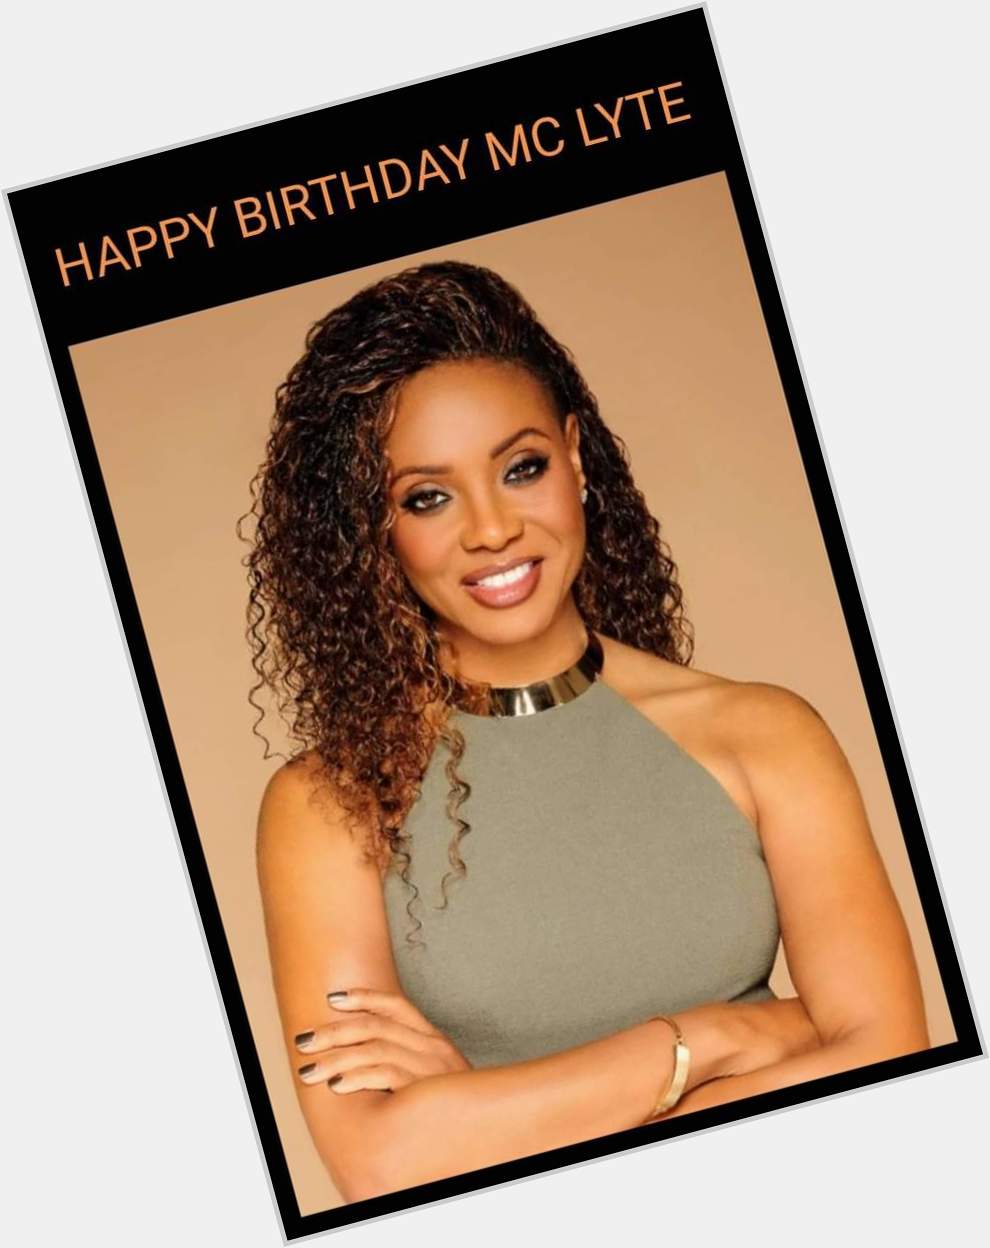 Fine as wine. 
Happy birthday 2 the incomparable MC Lyte 